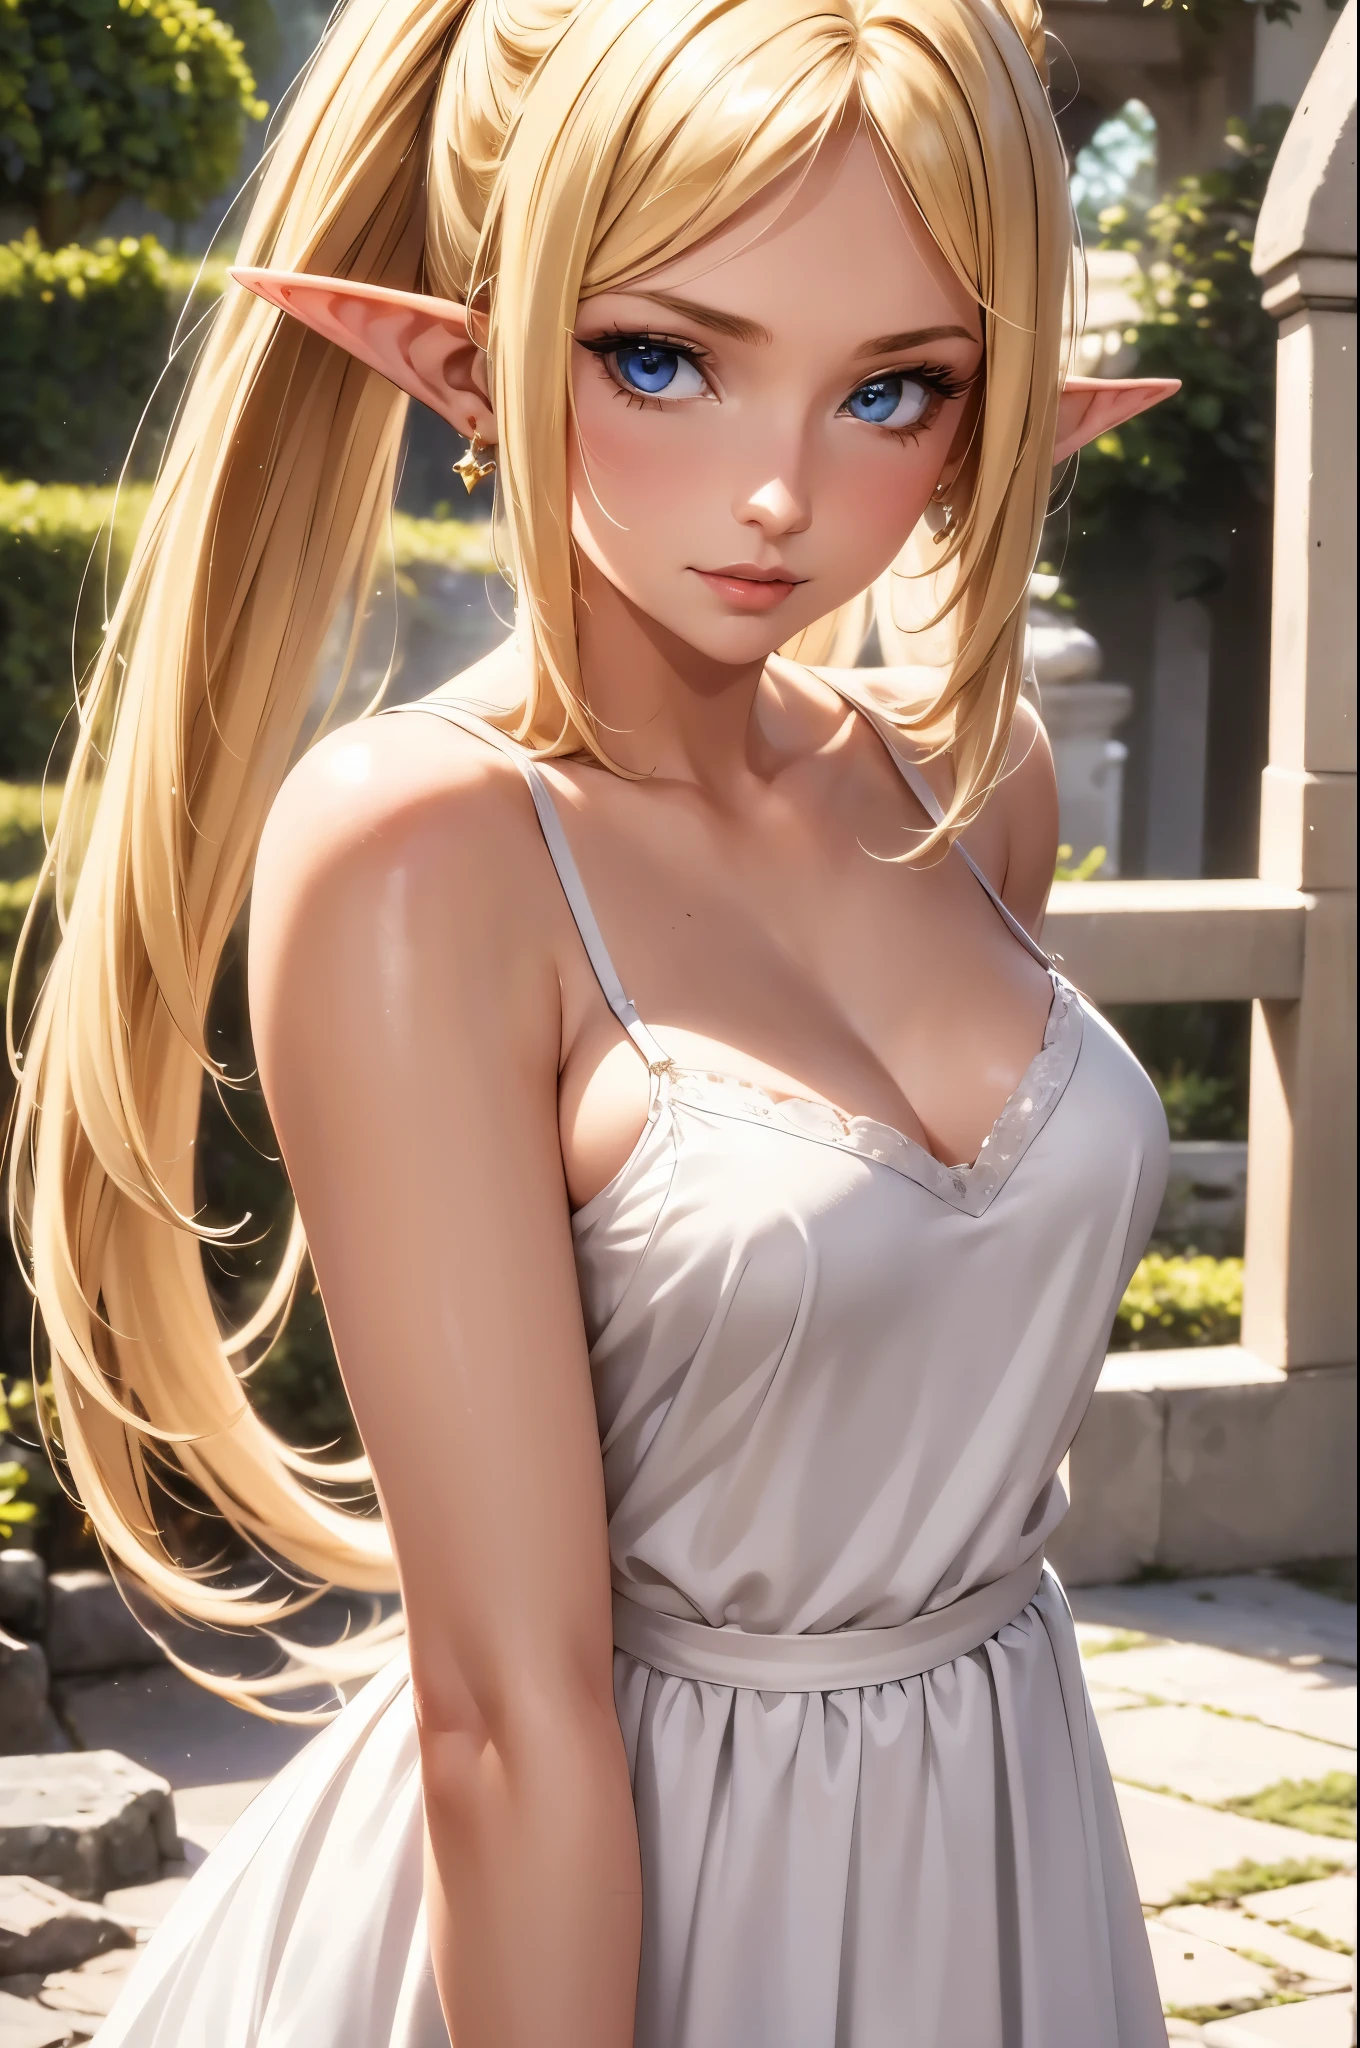 1 girl, Beautiful elf lady, blonde Long straight hair, upturn elf pointy ears, sexy figure, hot body, very beautiful face, detailed face, delicate eyes, detailed pupil, beautiful and delicate lips, blush, shy, heart, in love, white camisole long skirt, Simple and stylish, small crystal earrings, hand drawn animation, high detailed, outdoor, symmetrical clothes, best quality, masterpiece, retina,